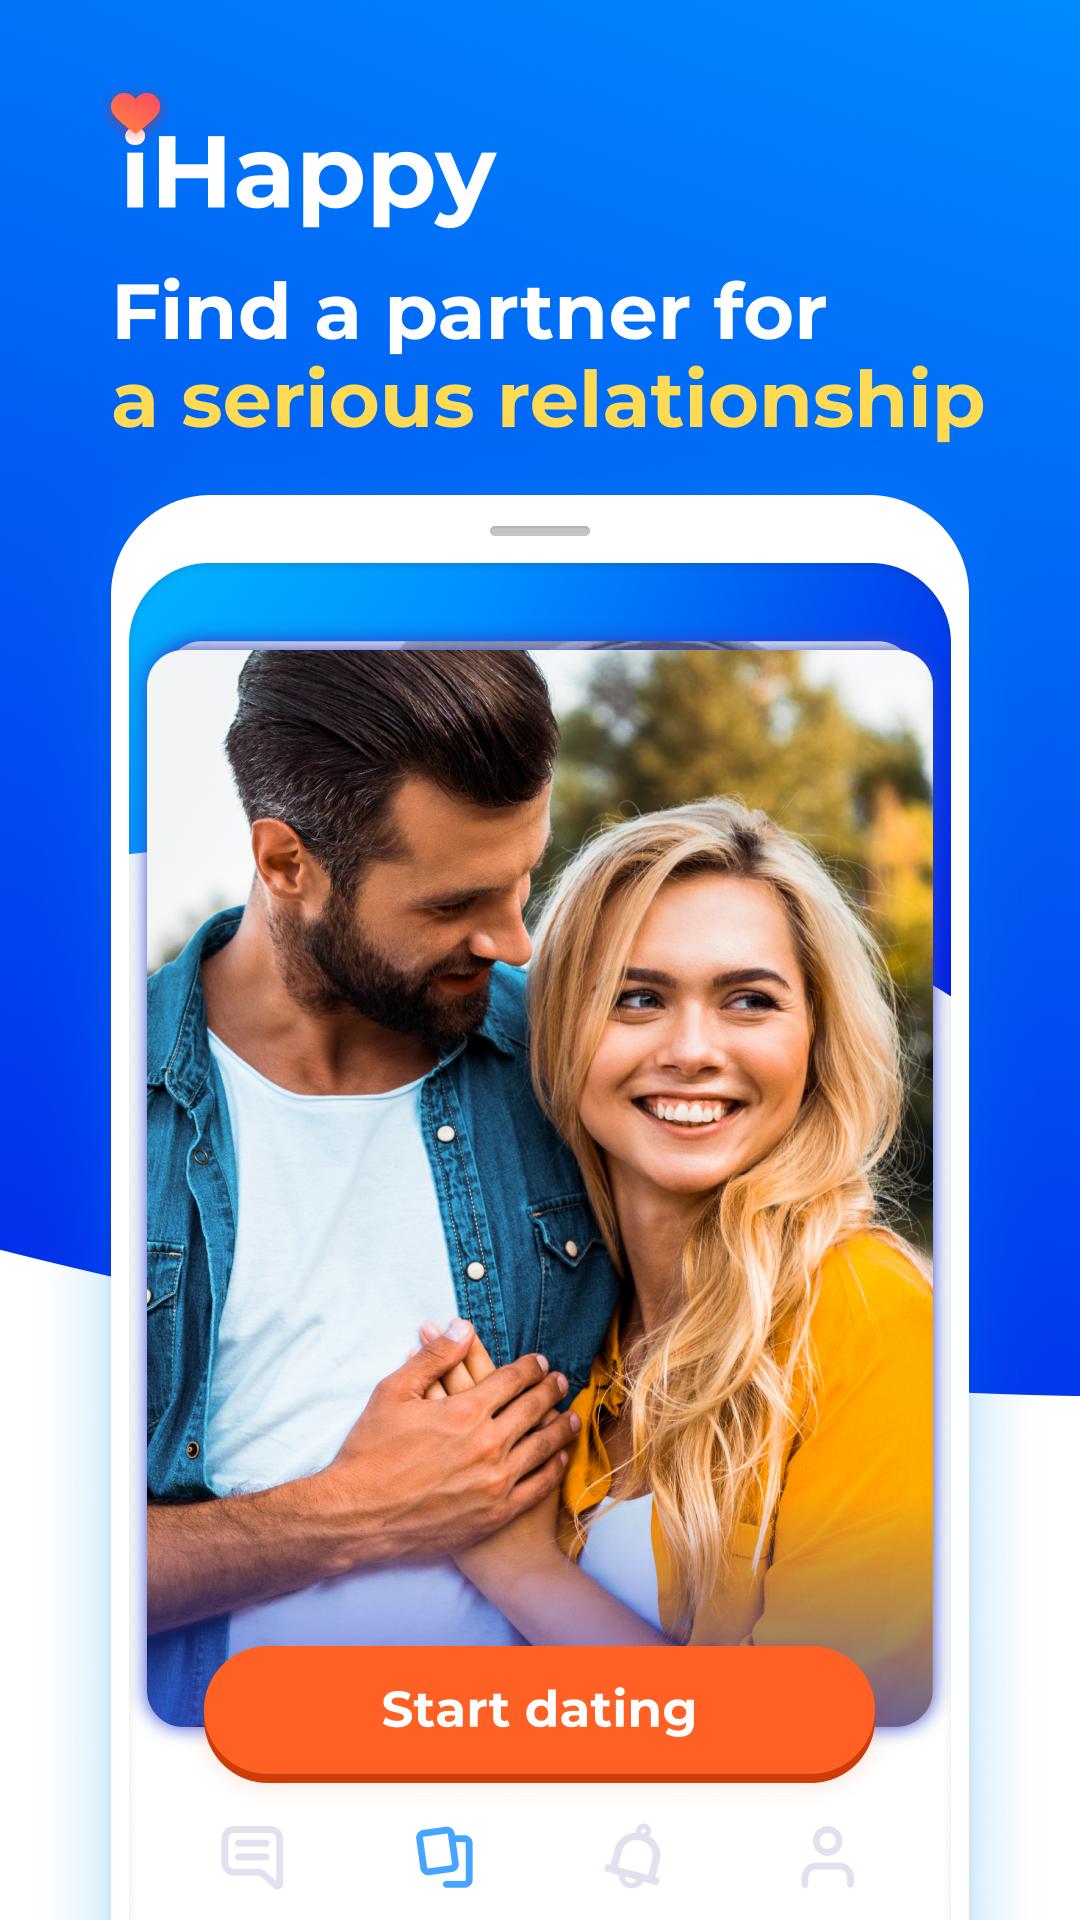 Dating with singles nearby - iHappy 1.0.41 Screenshot 3